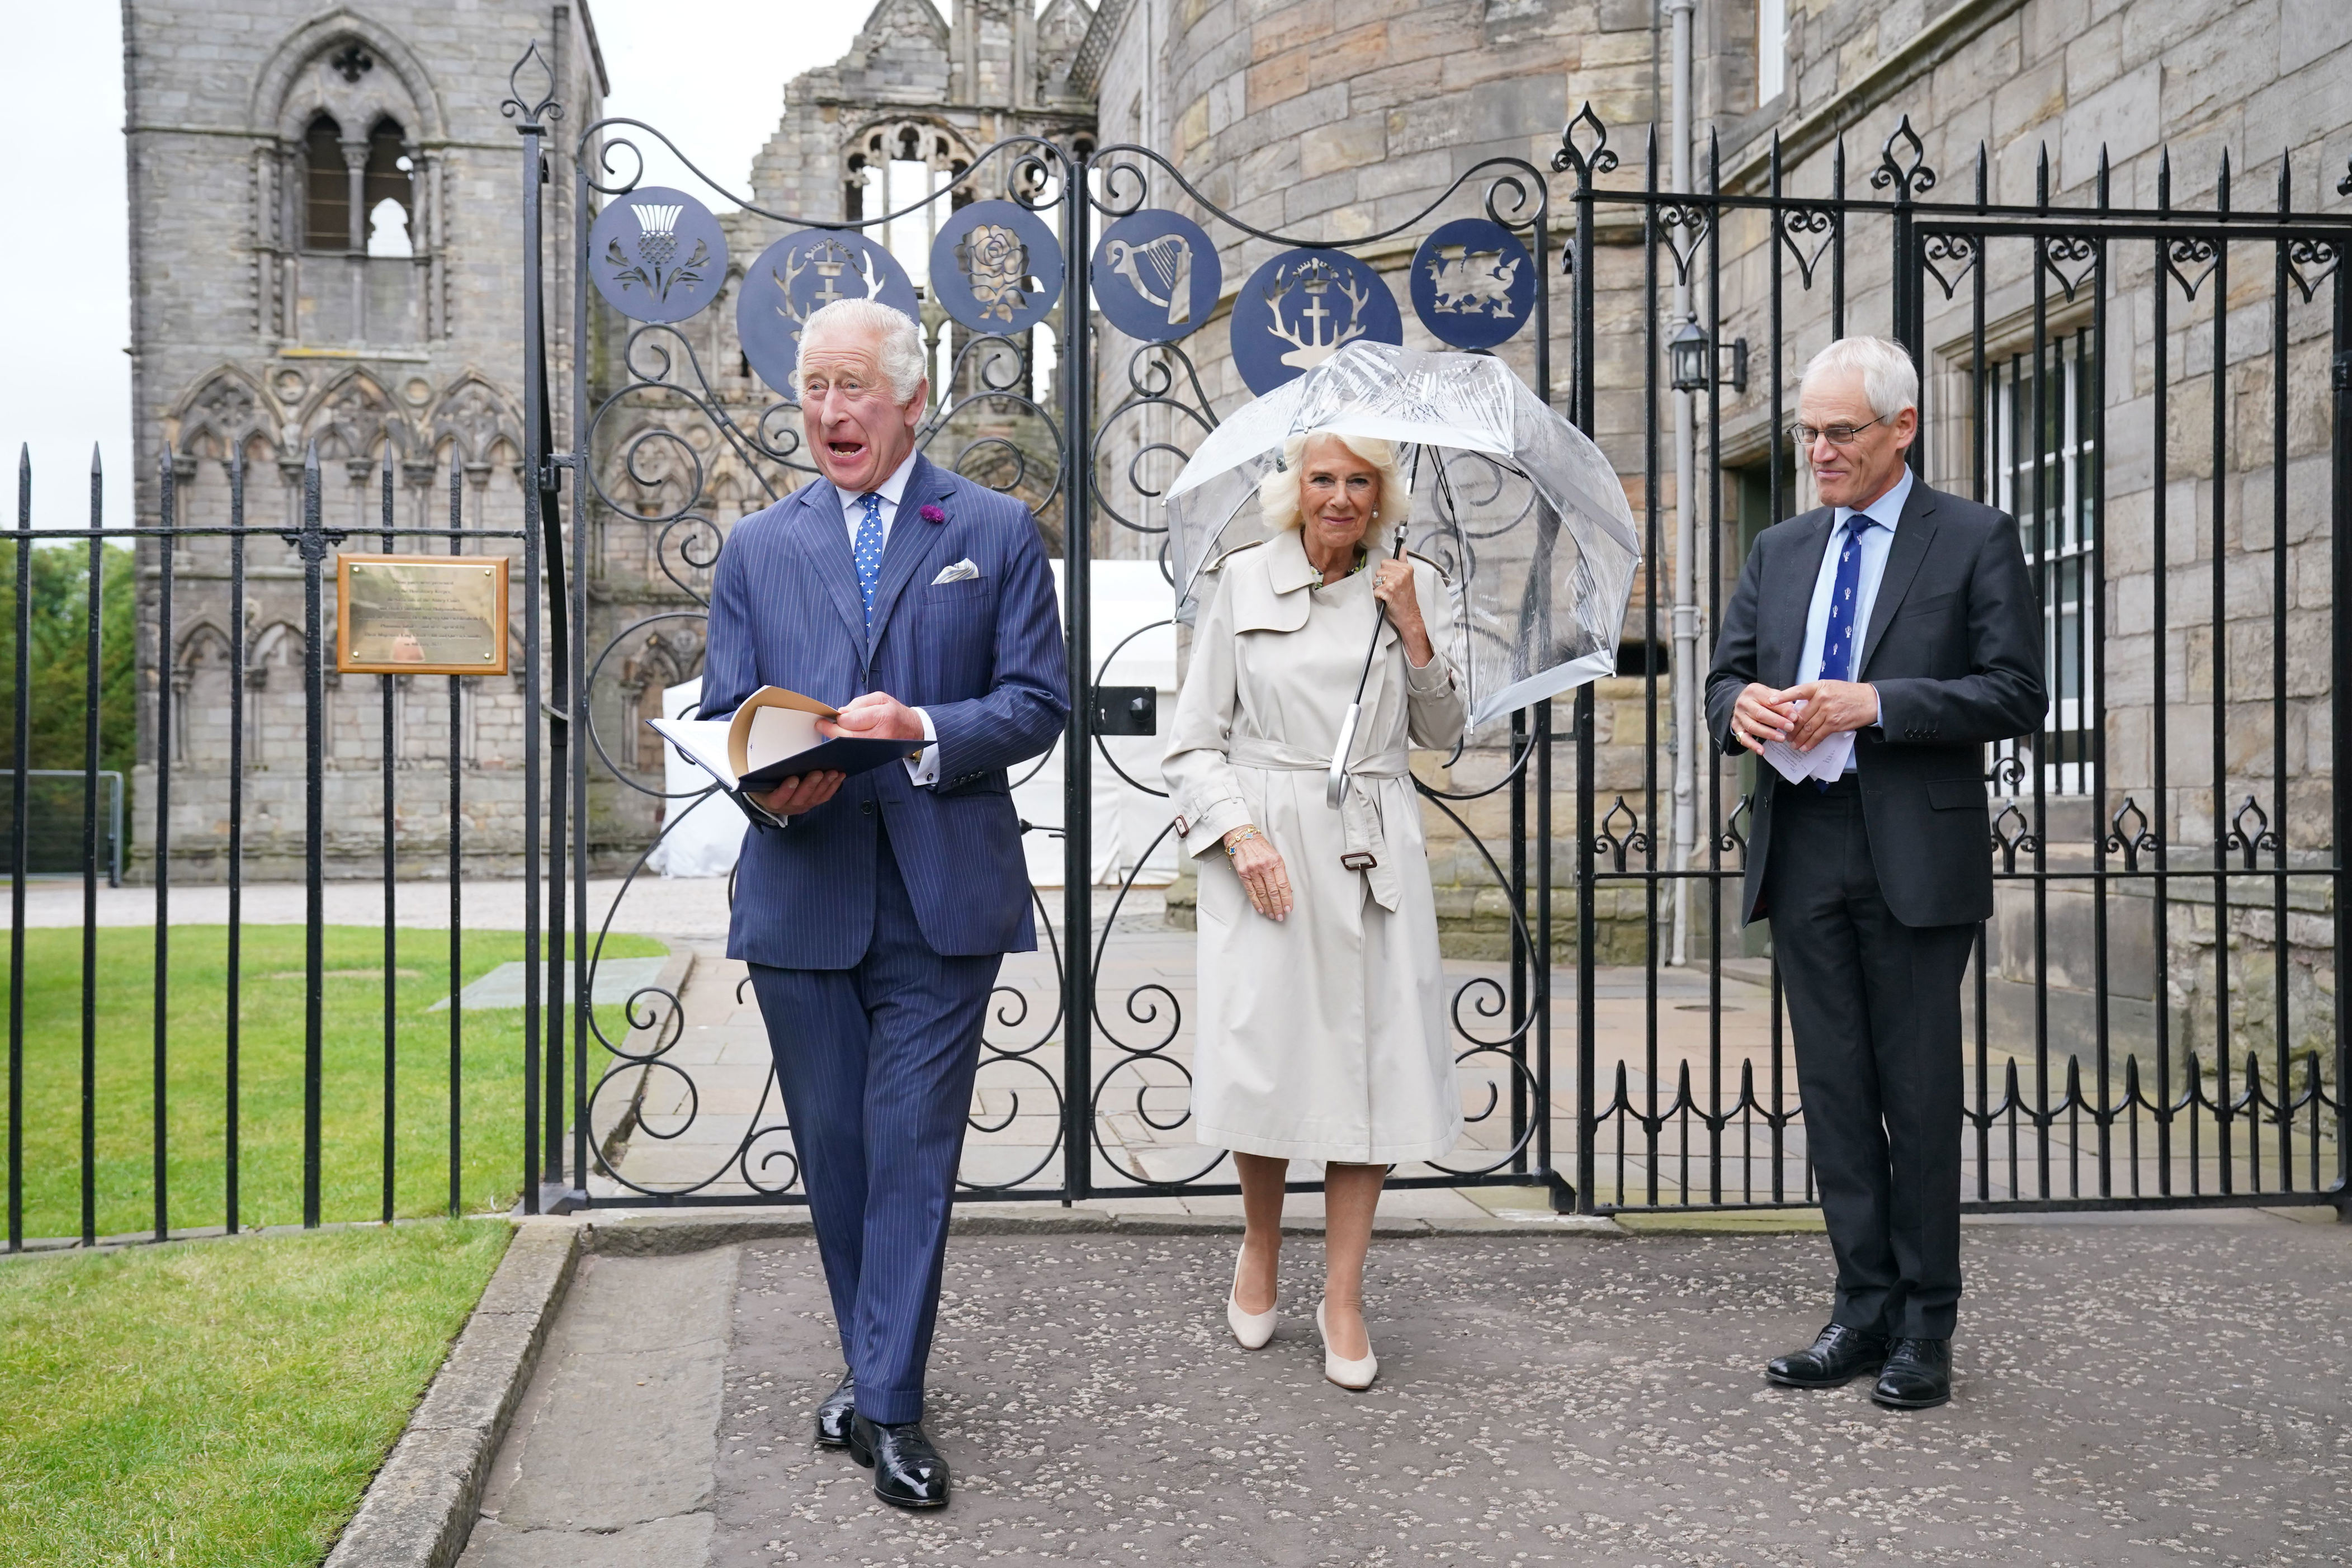 <p>King Charles III looked delighted as he and and Queen Camilla were presented with a leather-bound book detailing the history of Holyroodhouse by moderator of the High Constables Roderick Urquhart as they visited the new Jubilee Gates, installed at the entrance to Abbey Yard to mark the Platinum Jubilee of Queen Elizabeth II, at the Palace of Holyroodhouse in Edinburgh, Scotland, on July 4, 2023.</p>